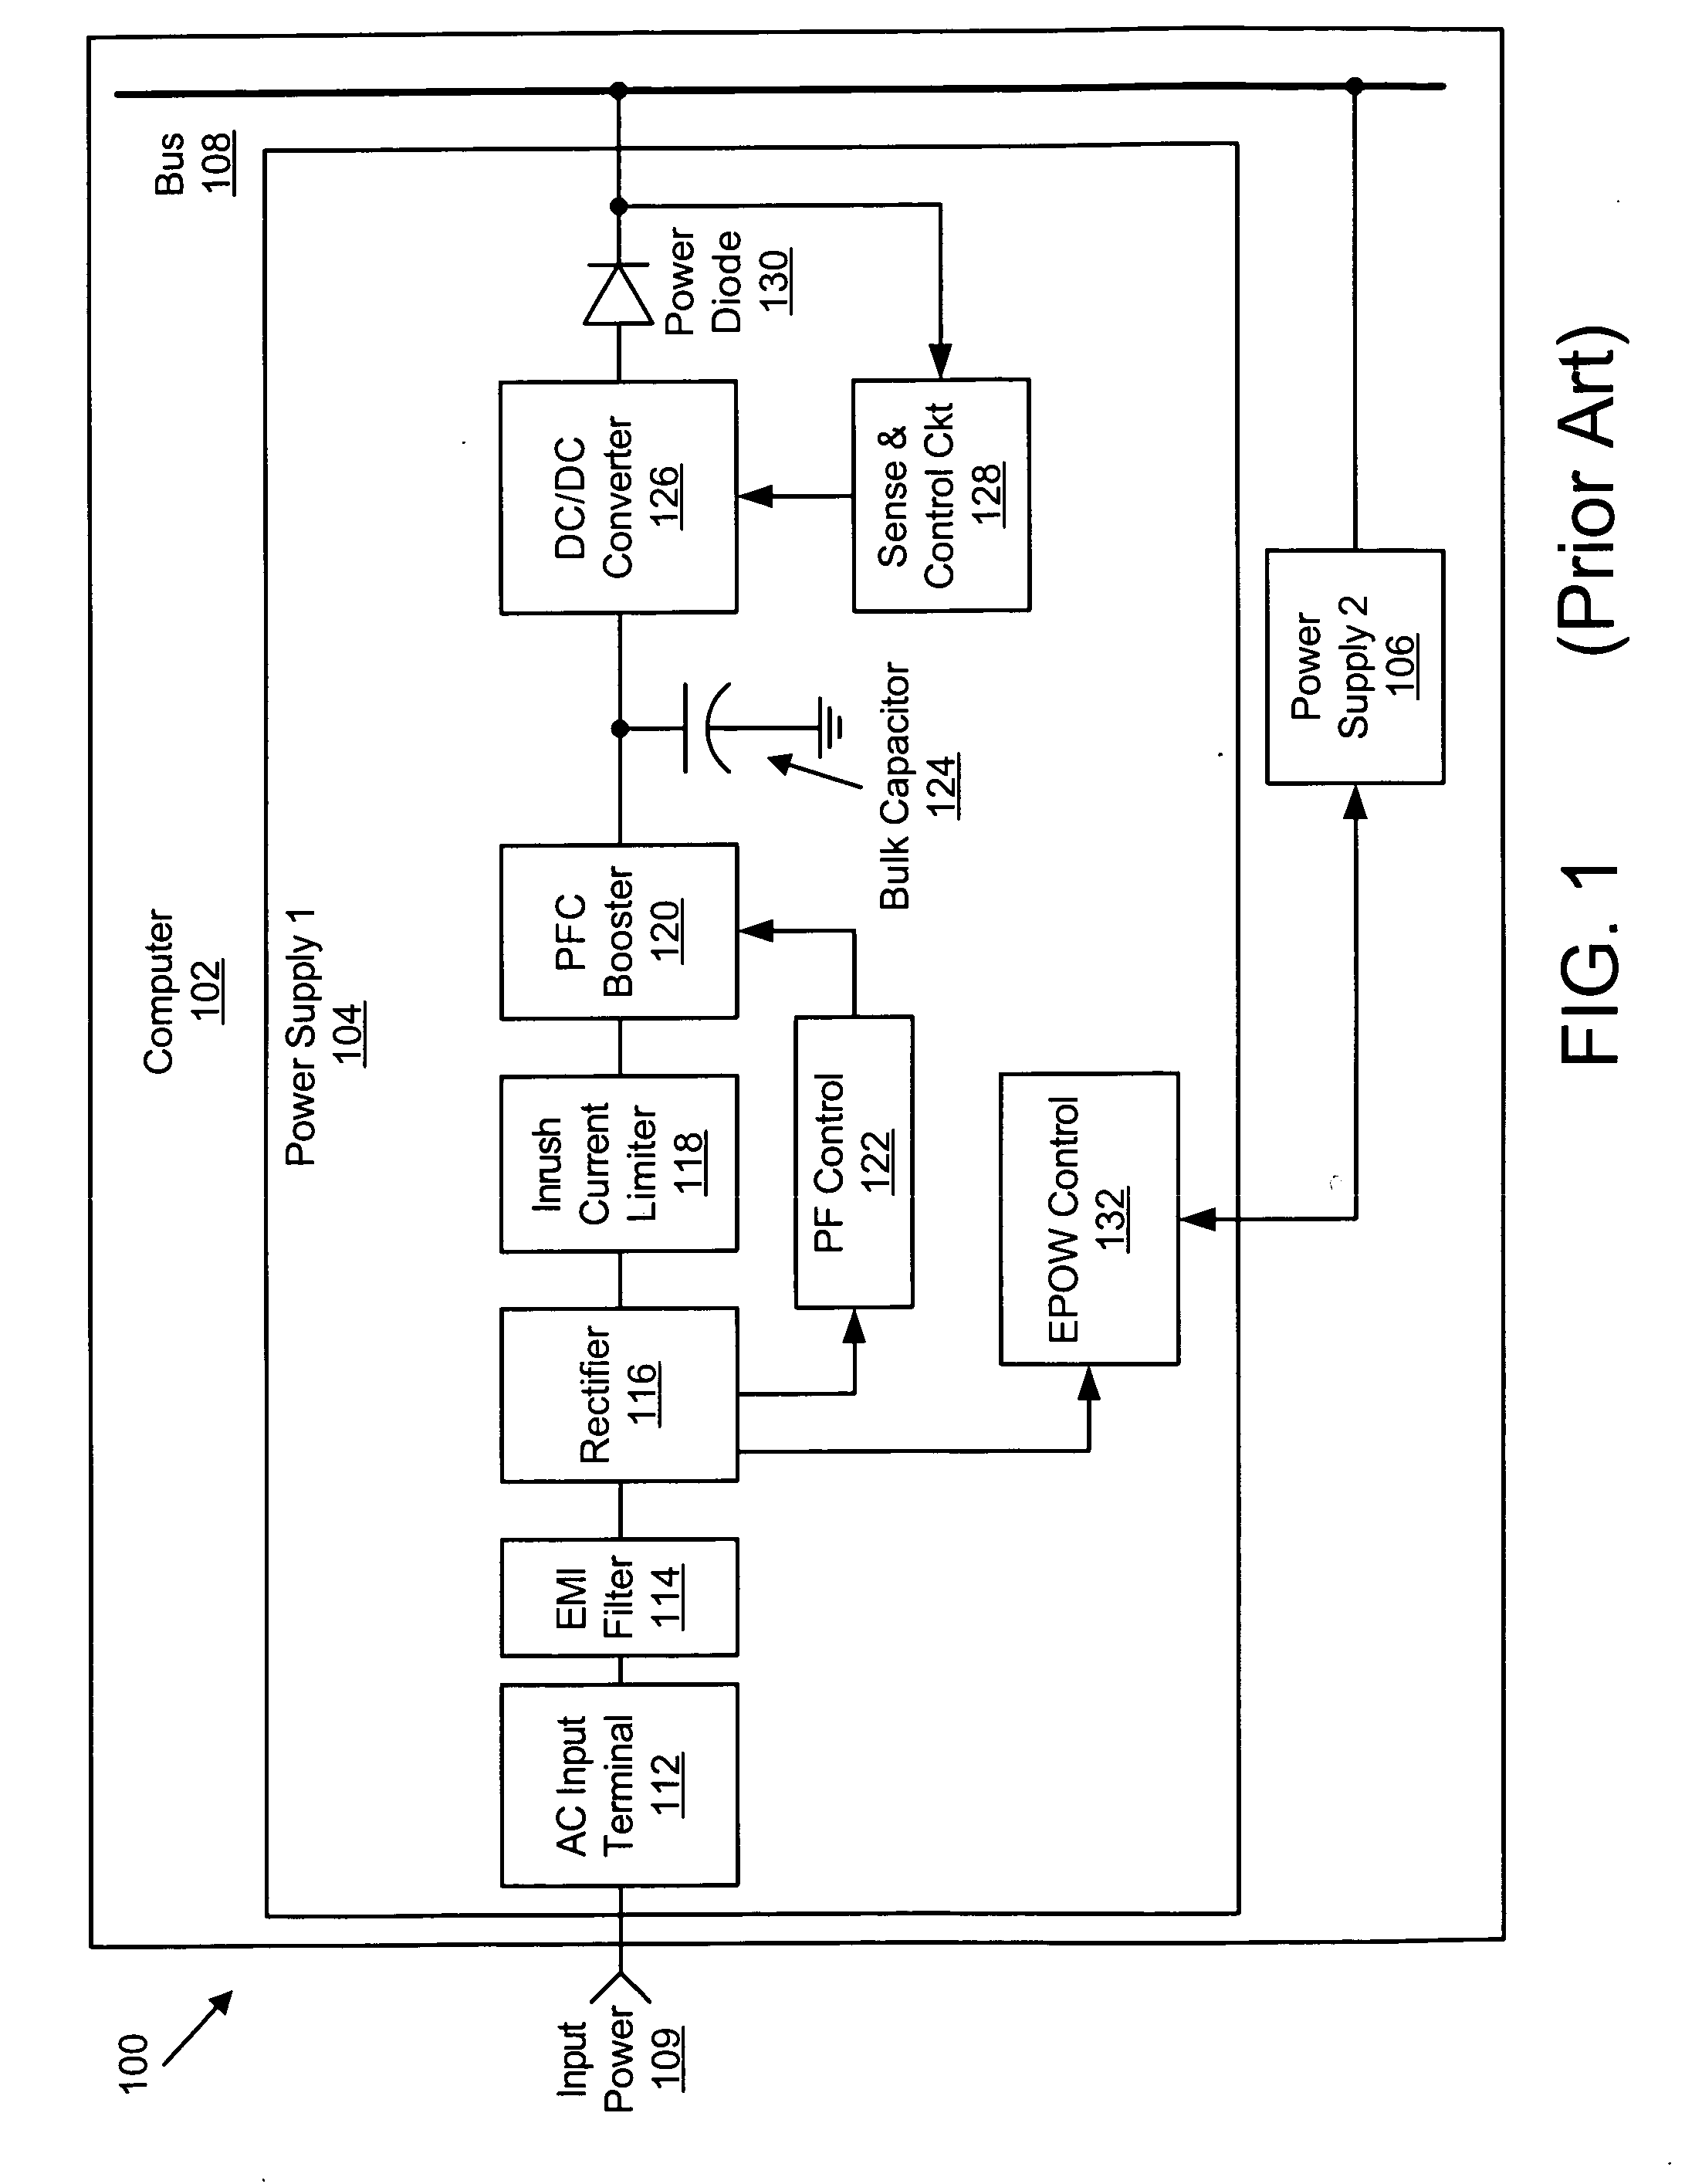 Apparatus, system, and method for maximizing power system holdup time during loss of input power